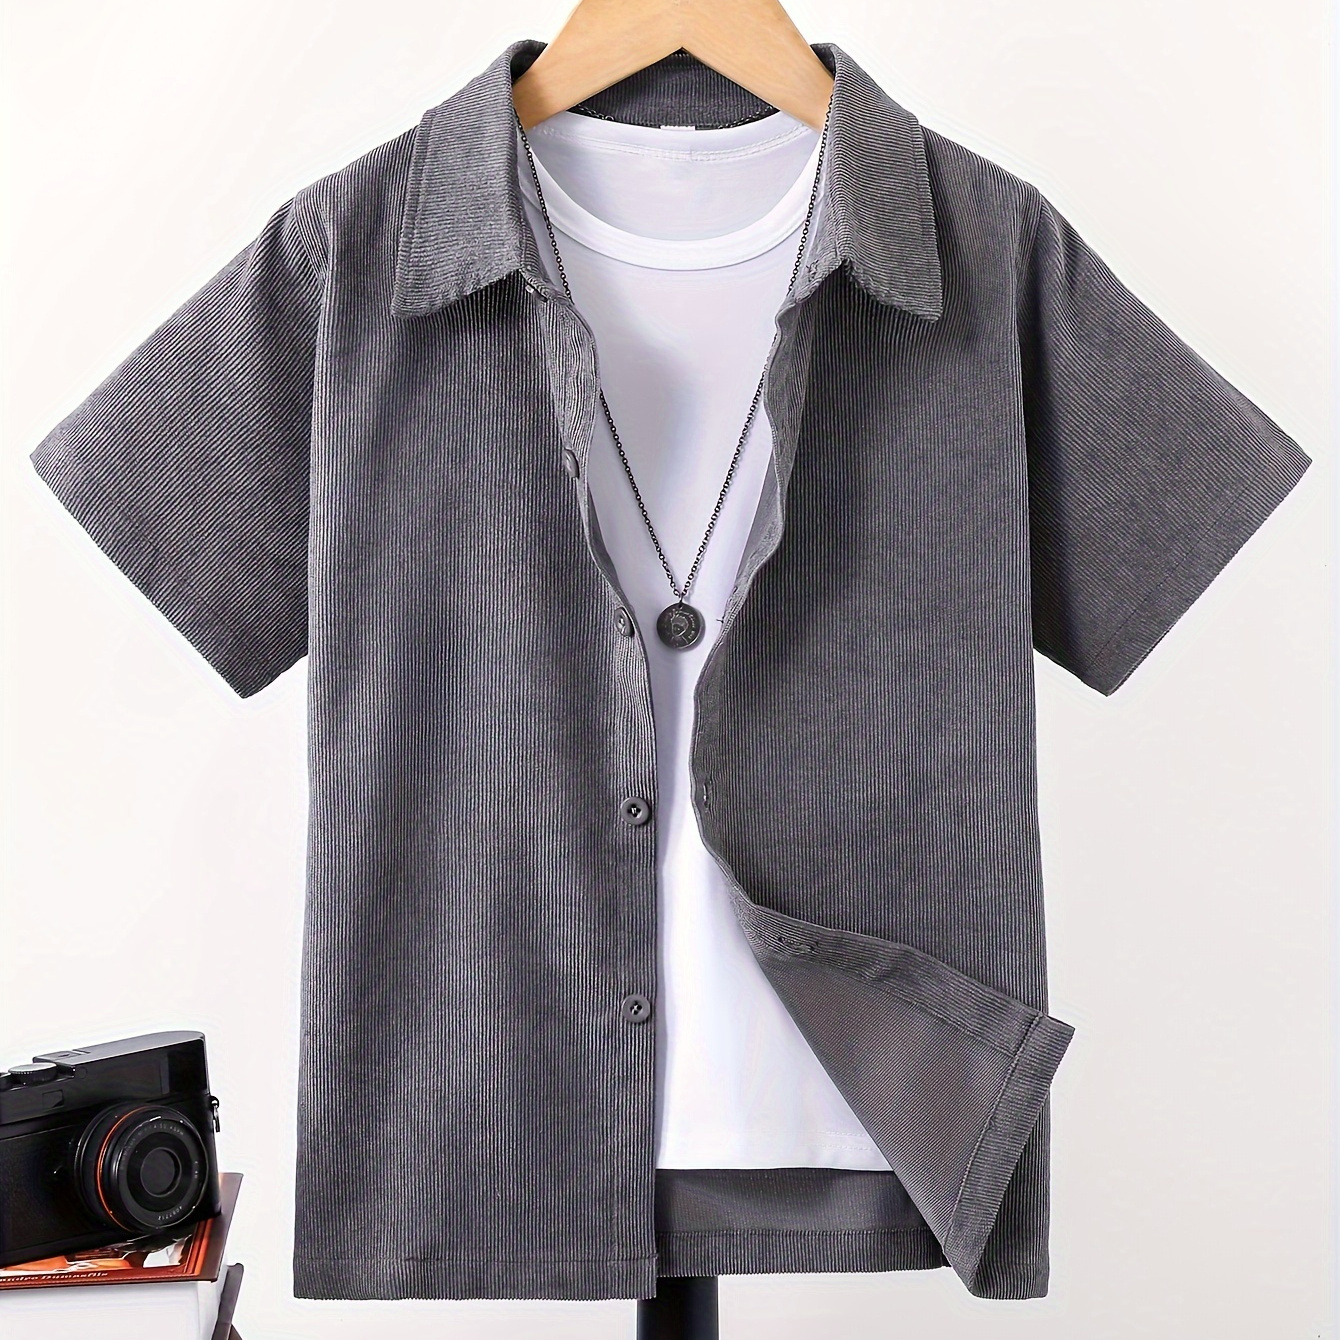 

Boy's Corduroy Shirt, Versatile Gray Top, Short Sleeve Trending Loose Summer Spring Short Coat, Ideal For Travel Holiday Casual Wear